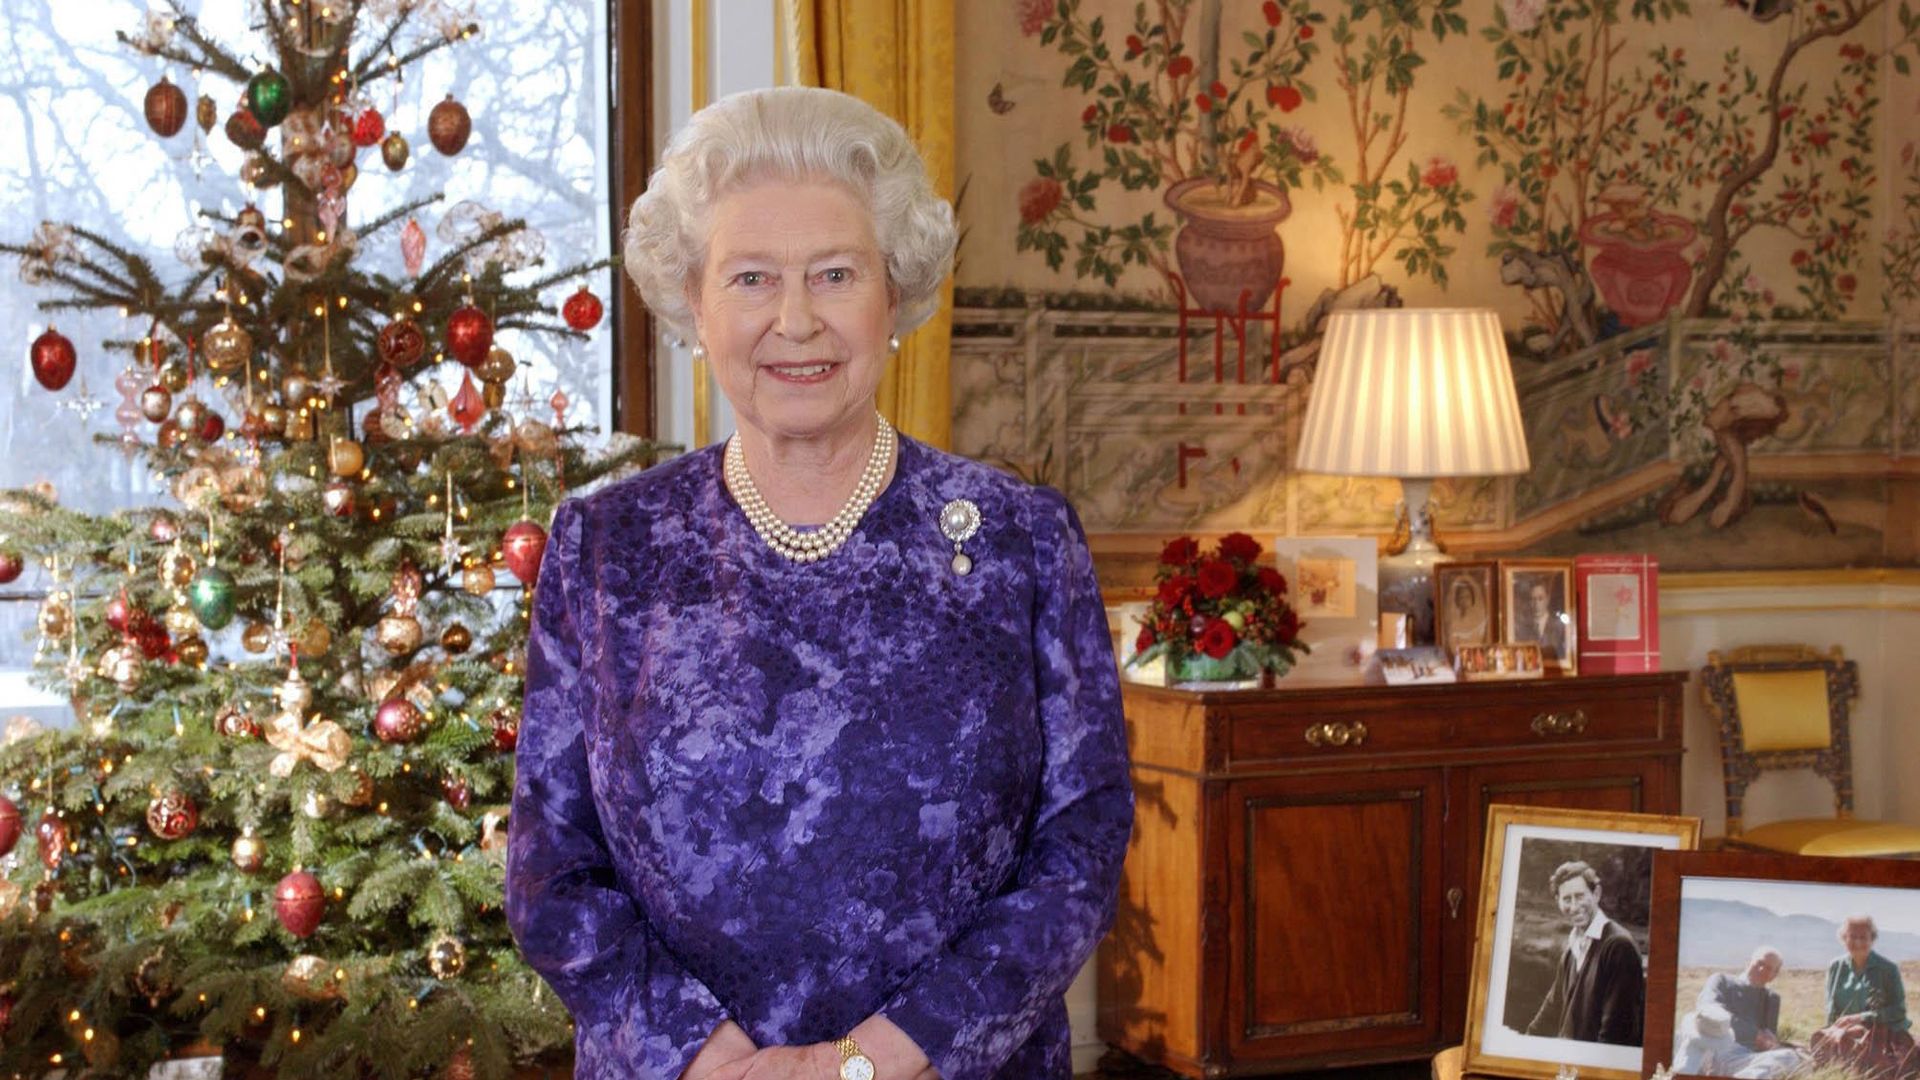 The Queen inside the Yellow Drawing Roomby family portraits and a Christmas tree